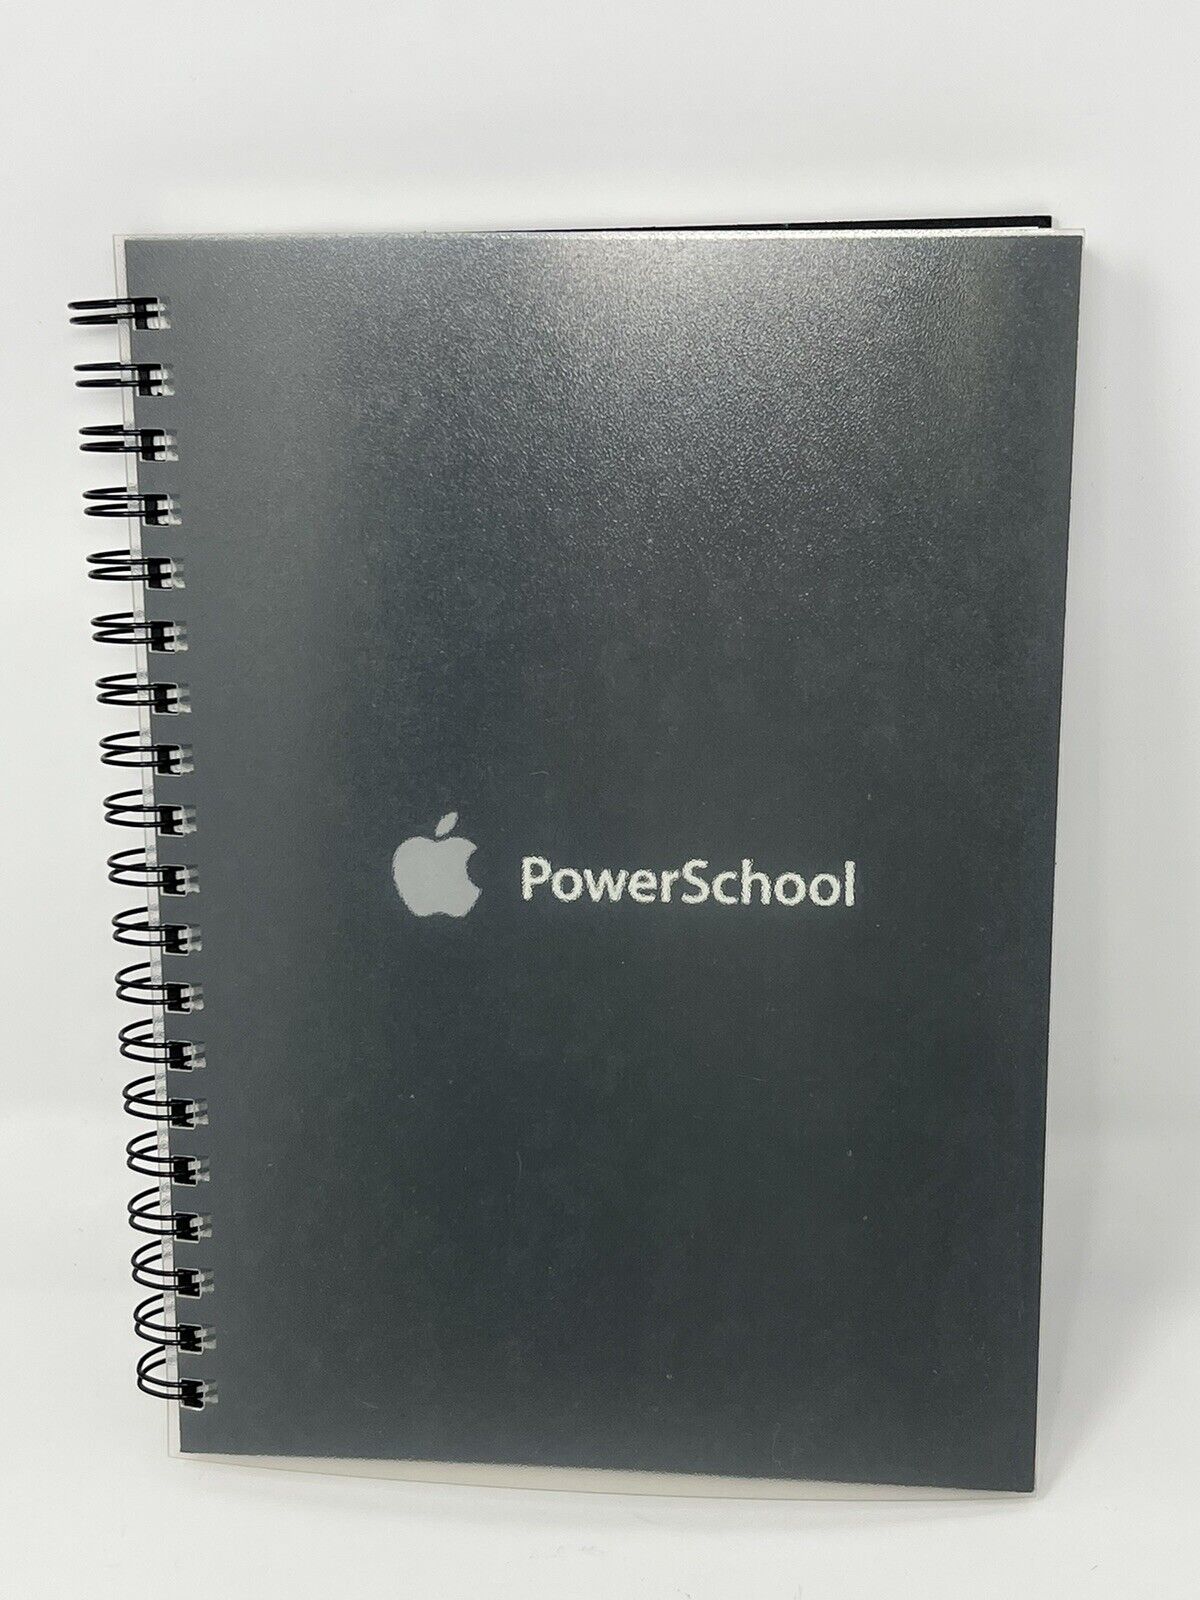 NEW Old Stock  Apple Computer Power School Spiral Notebook Black Hard Cover